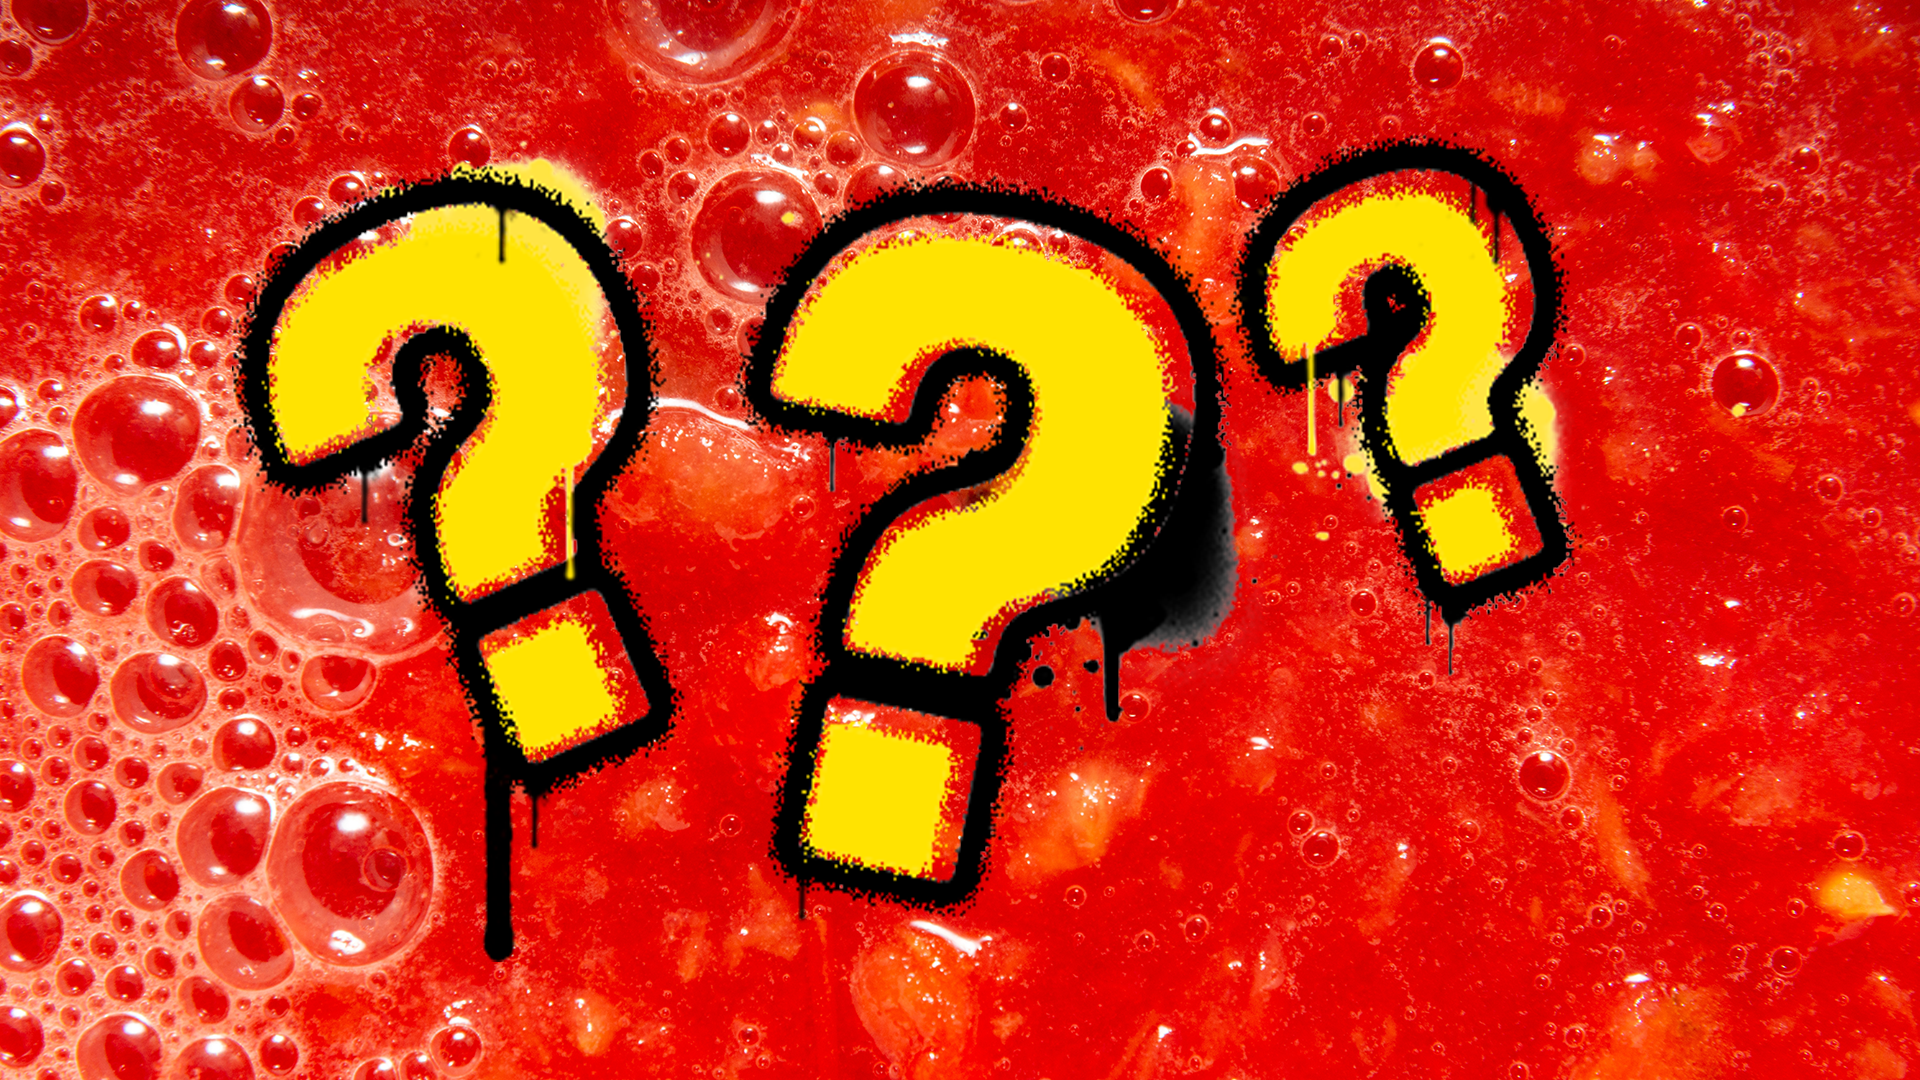 Soup background and question marks